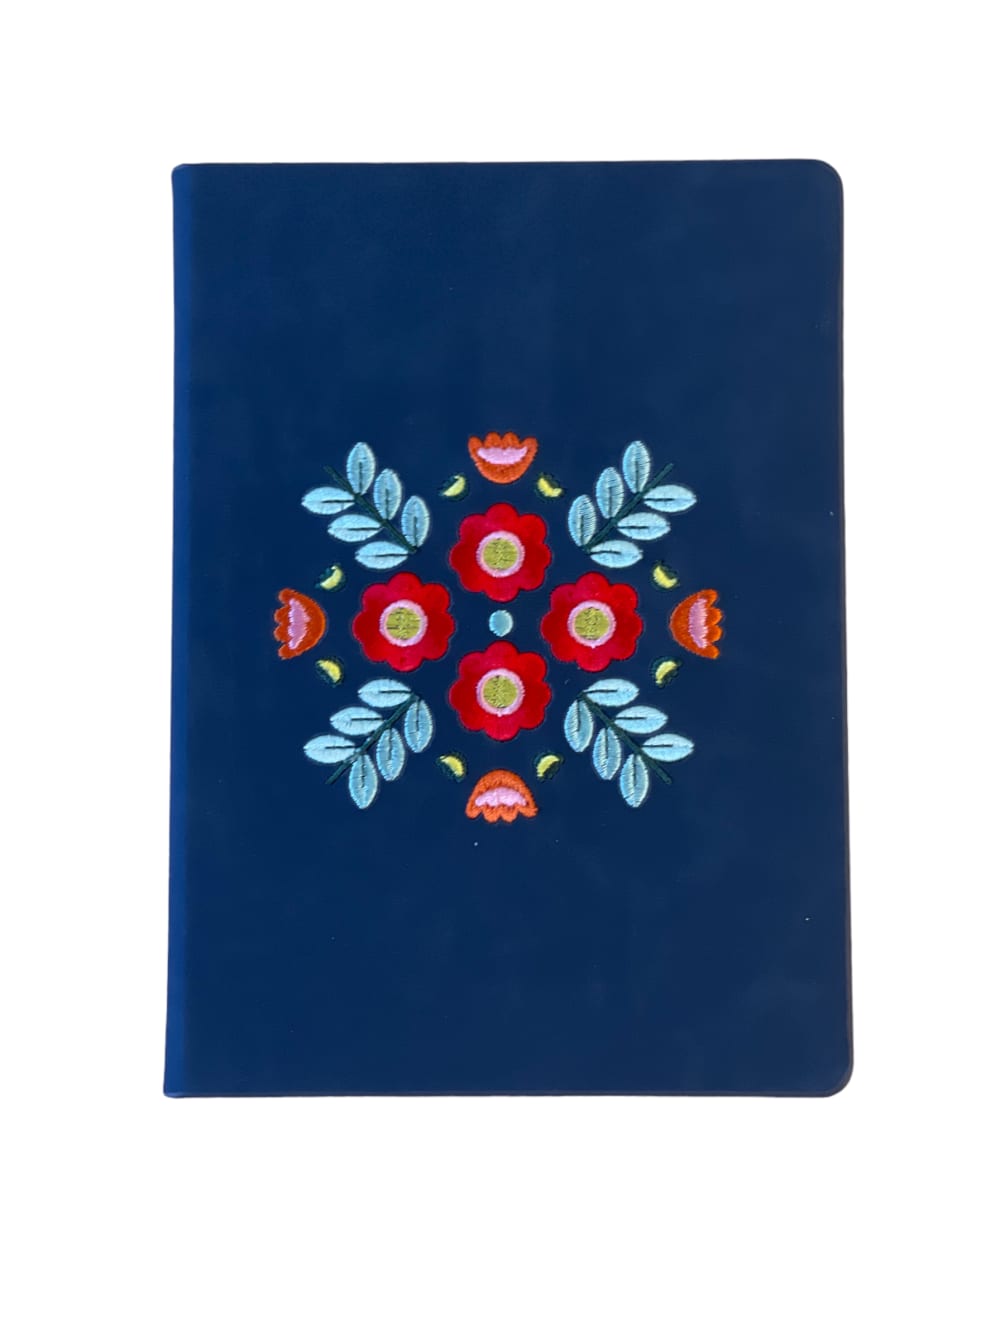 5.75&quot; X 8.25&quot; hardcover notebook
Embroidered cover artwork 144 lined pages 
Glorious smythe-sewn